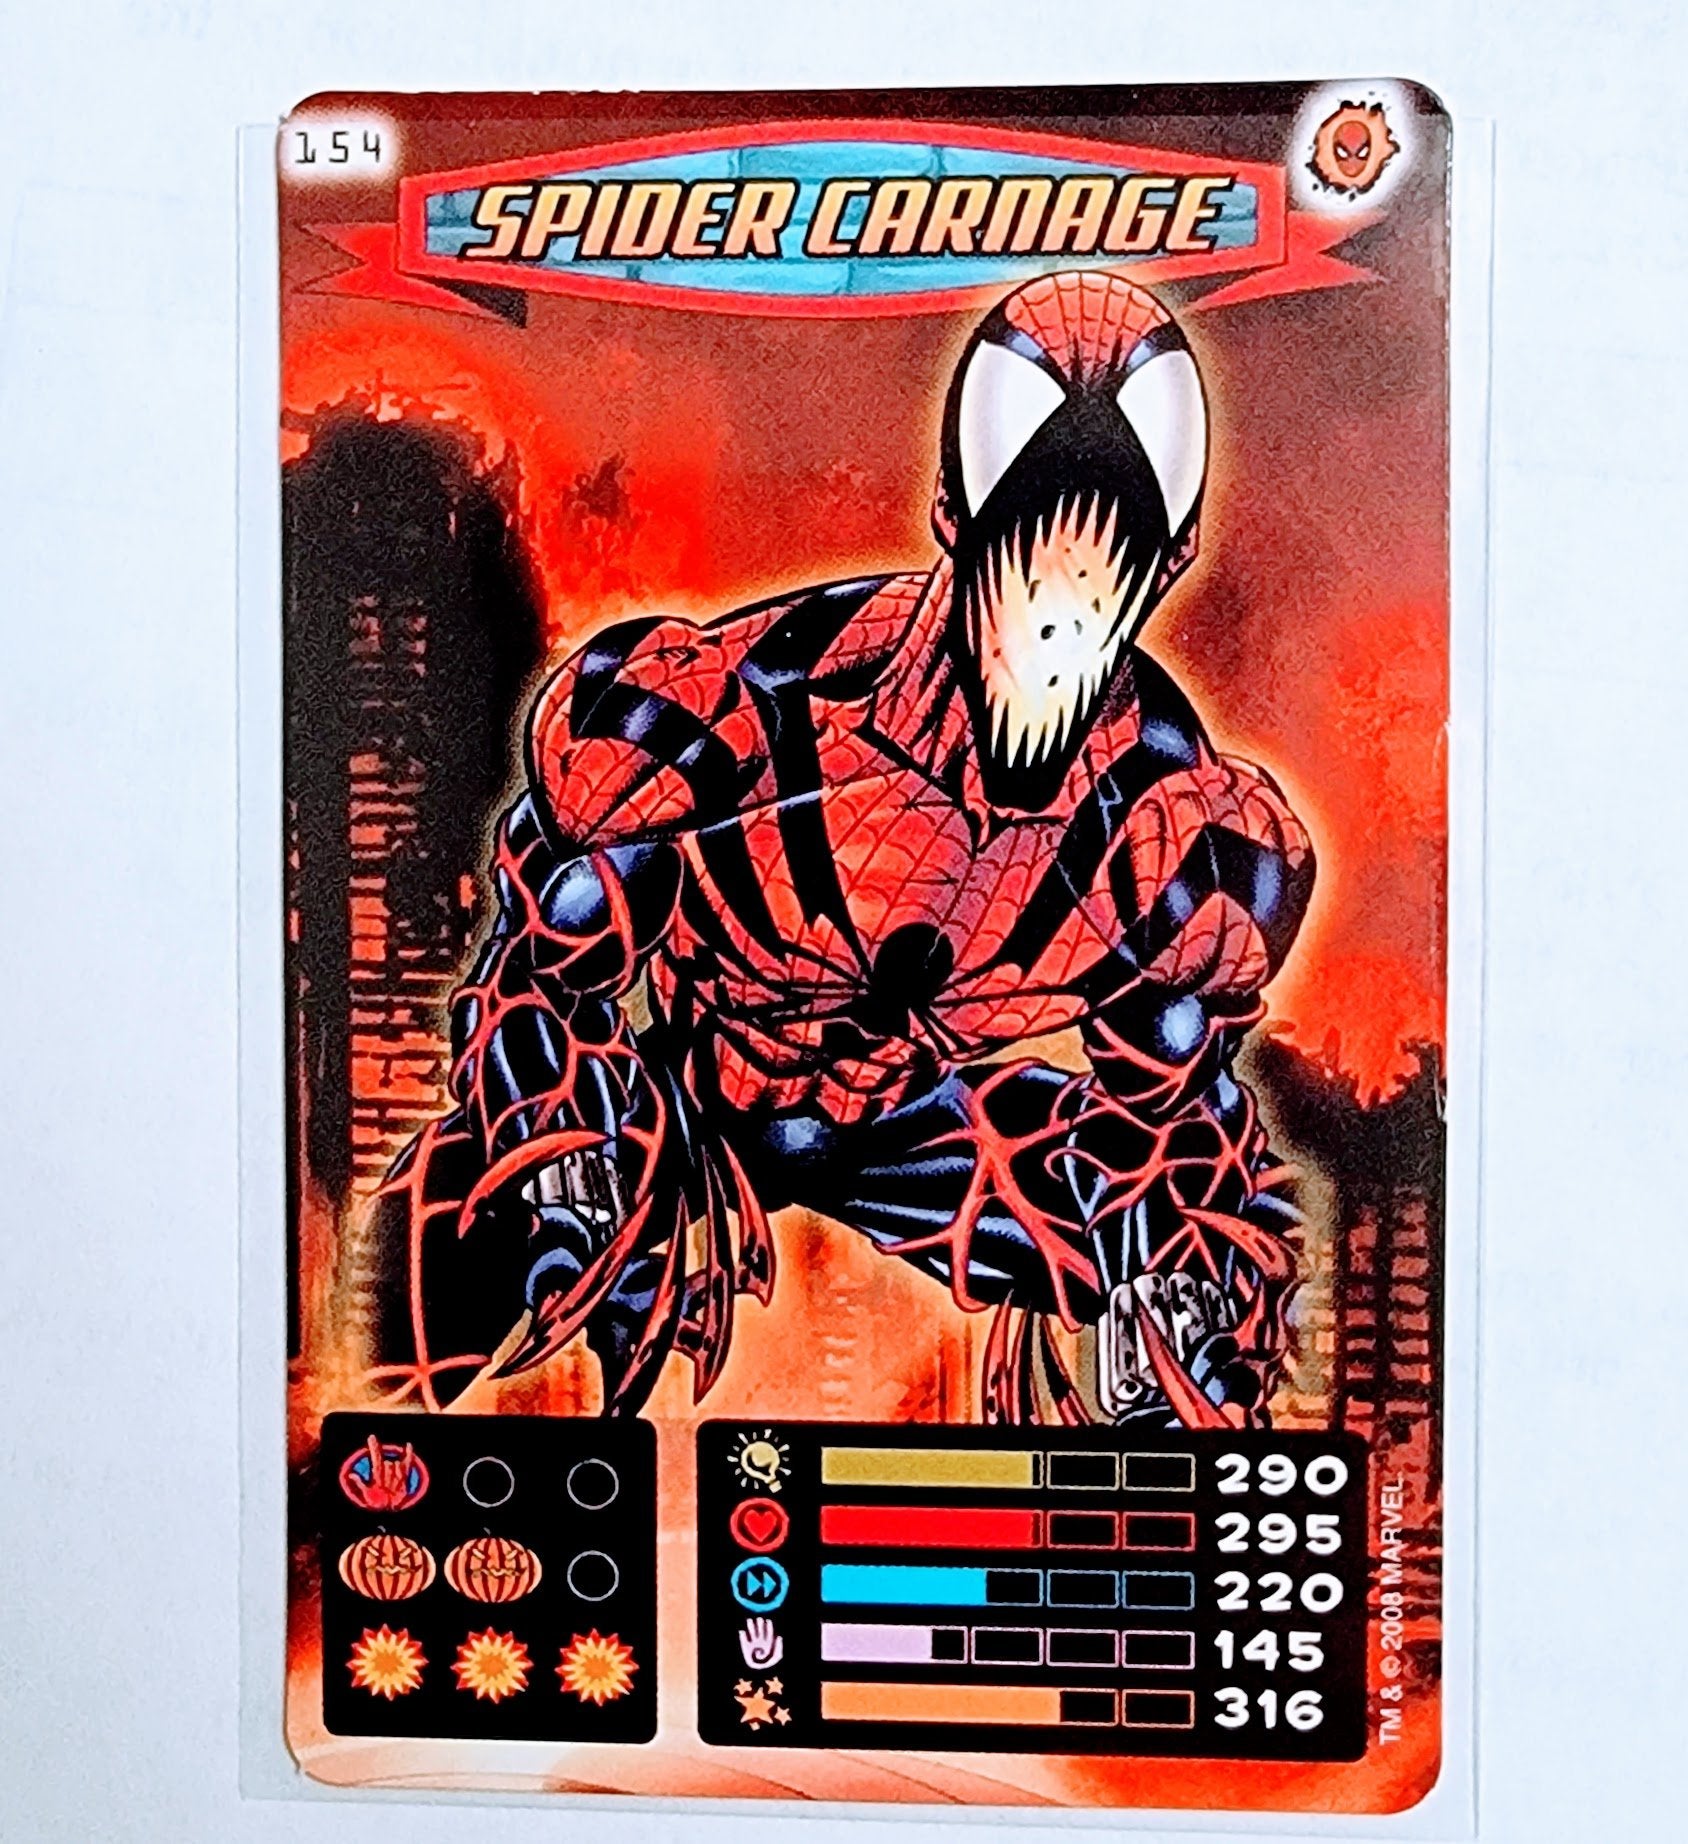 2008 Spiderman Heroes and Villians Spider-Carnage #154 Marvel Booster Trading Card UPTI simple Xclusive Collectibles   